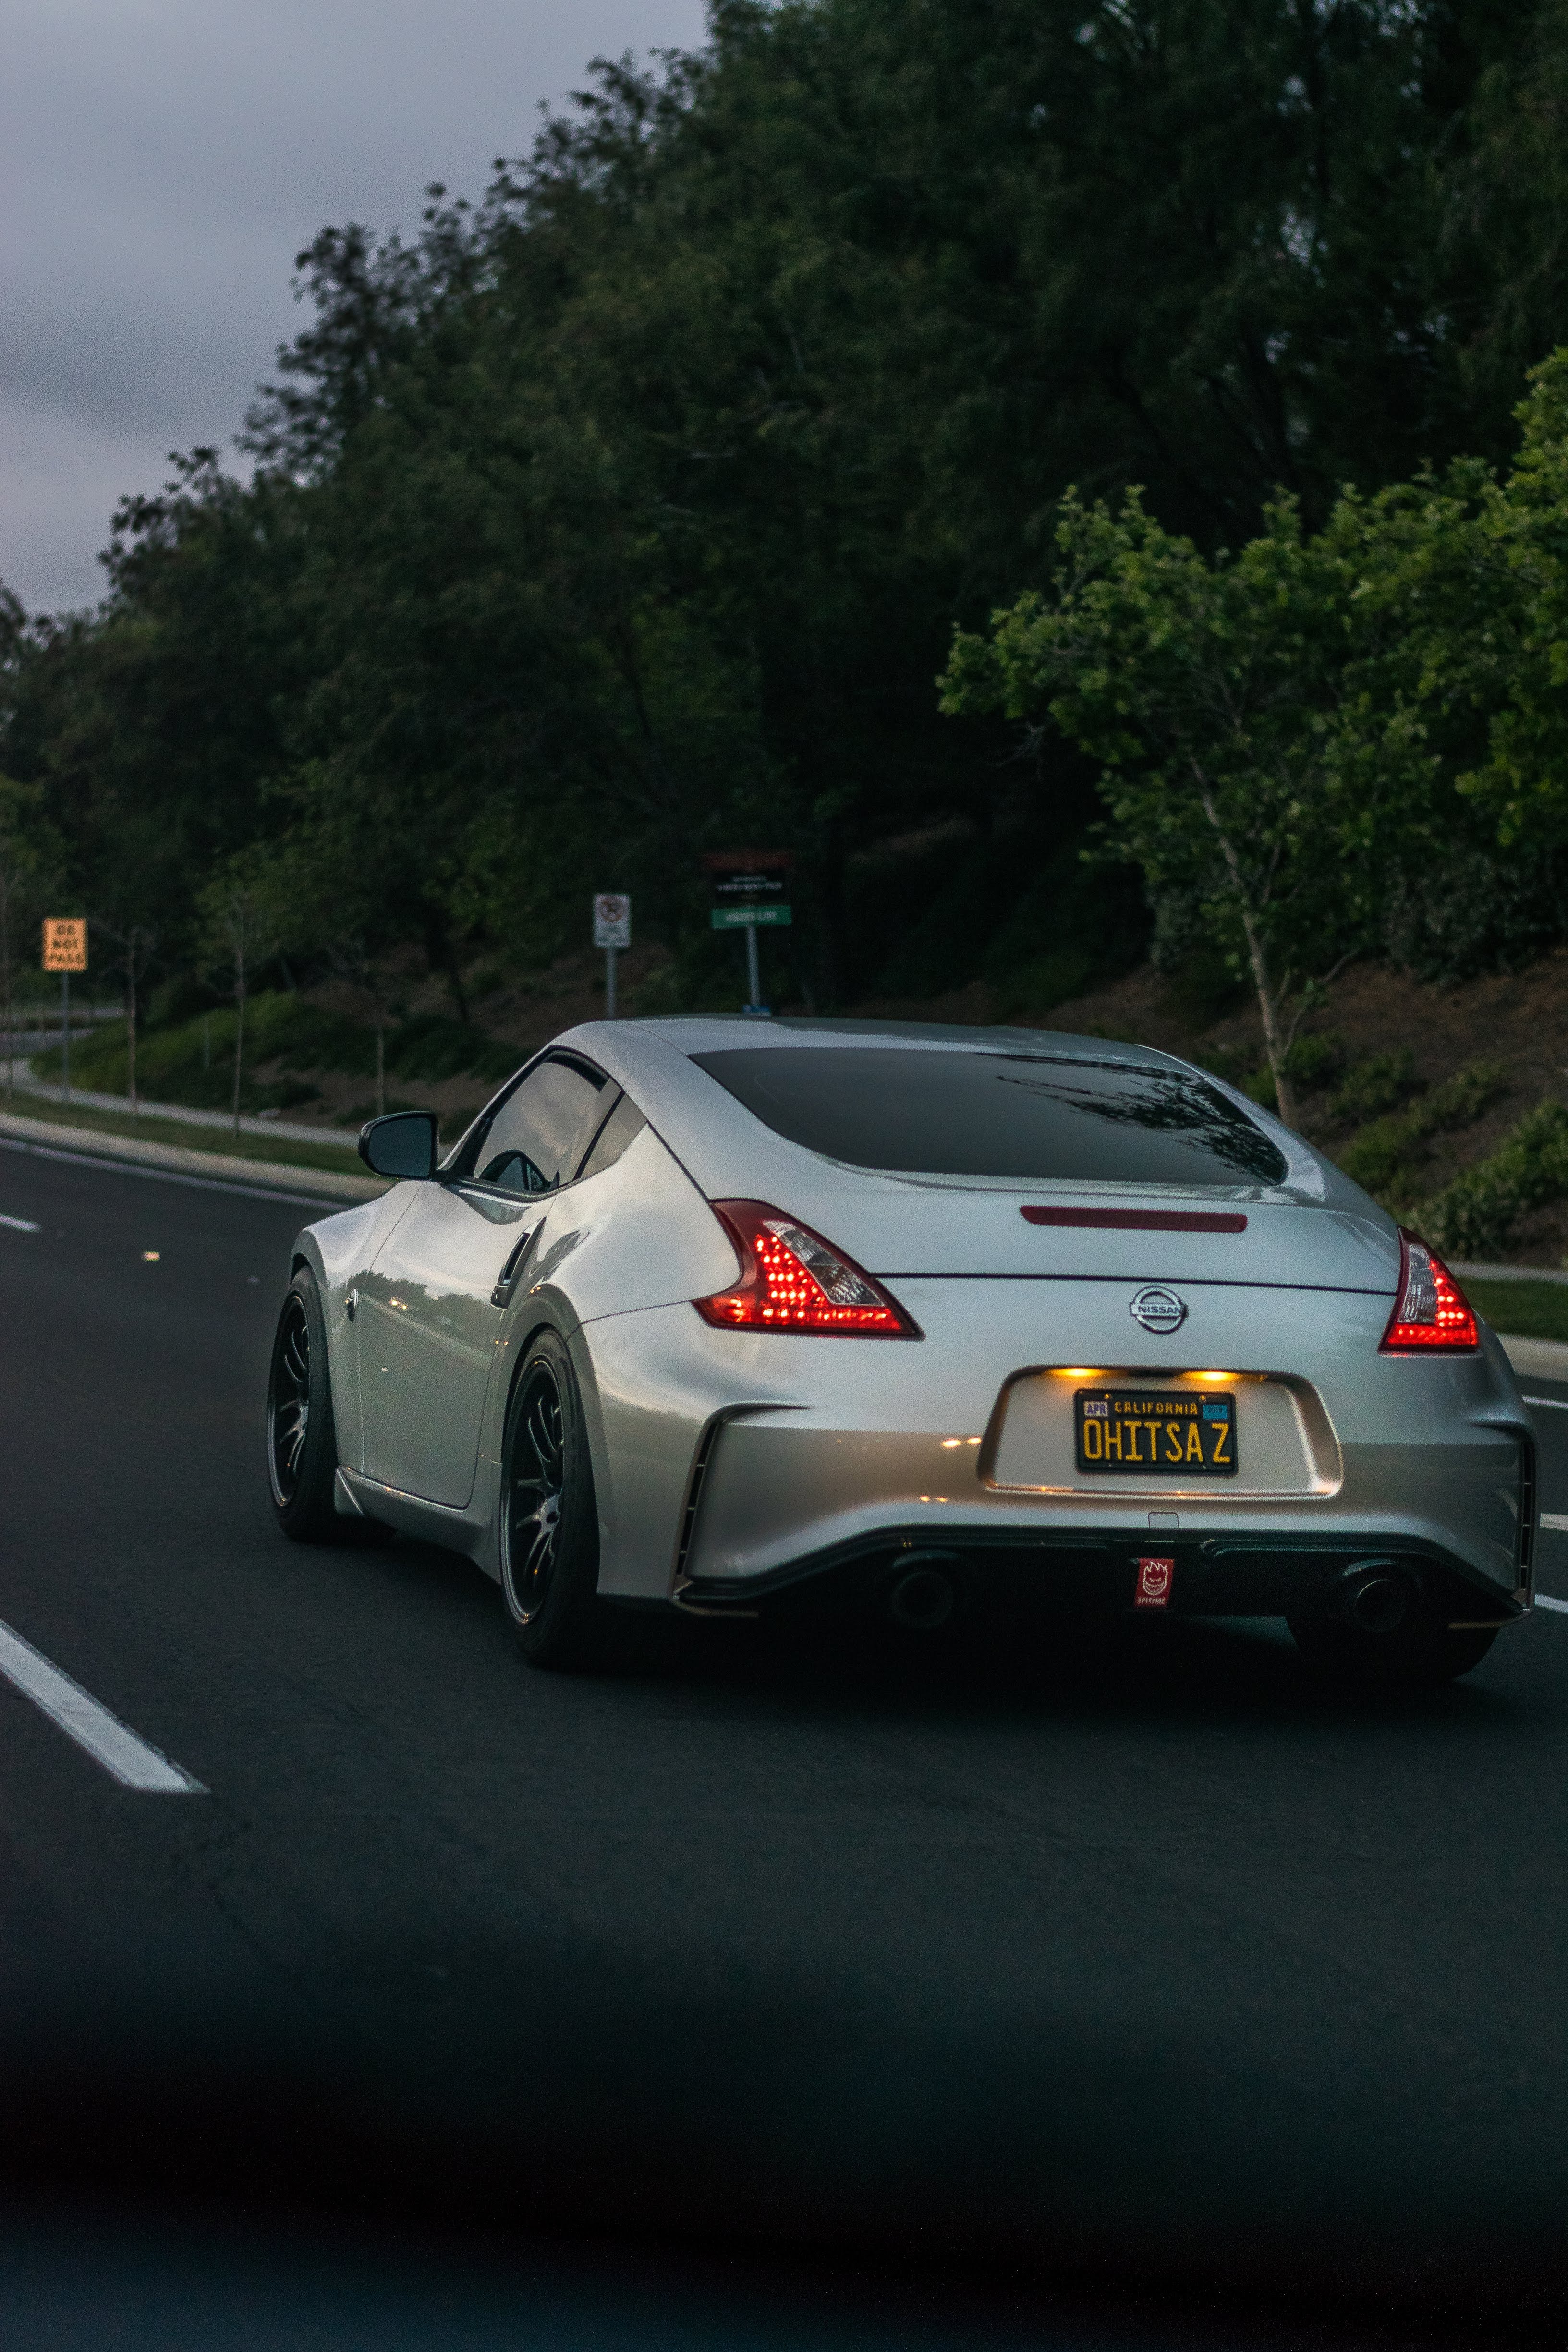 movement, cars, road, traffic, silver, silvery, nissan 370z